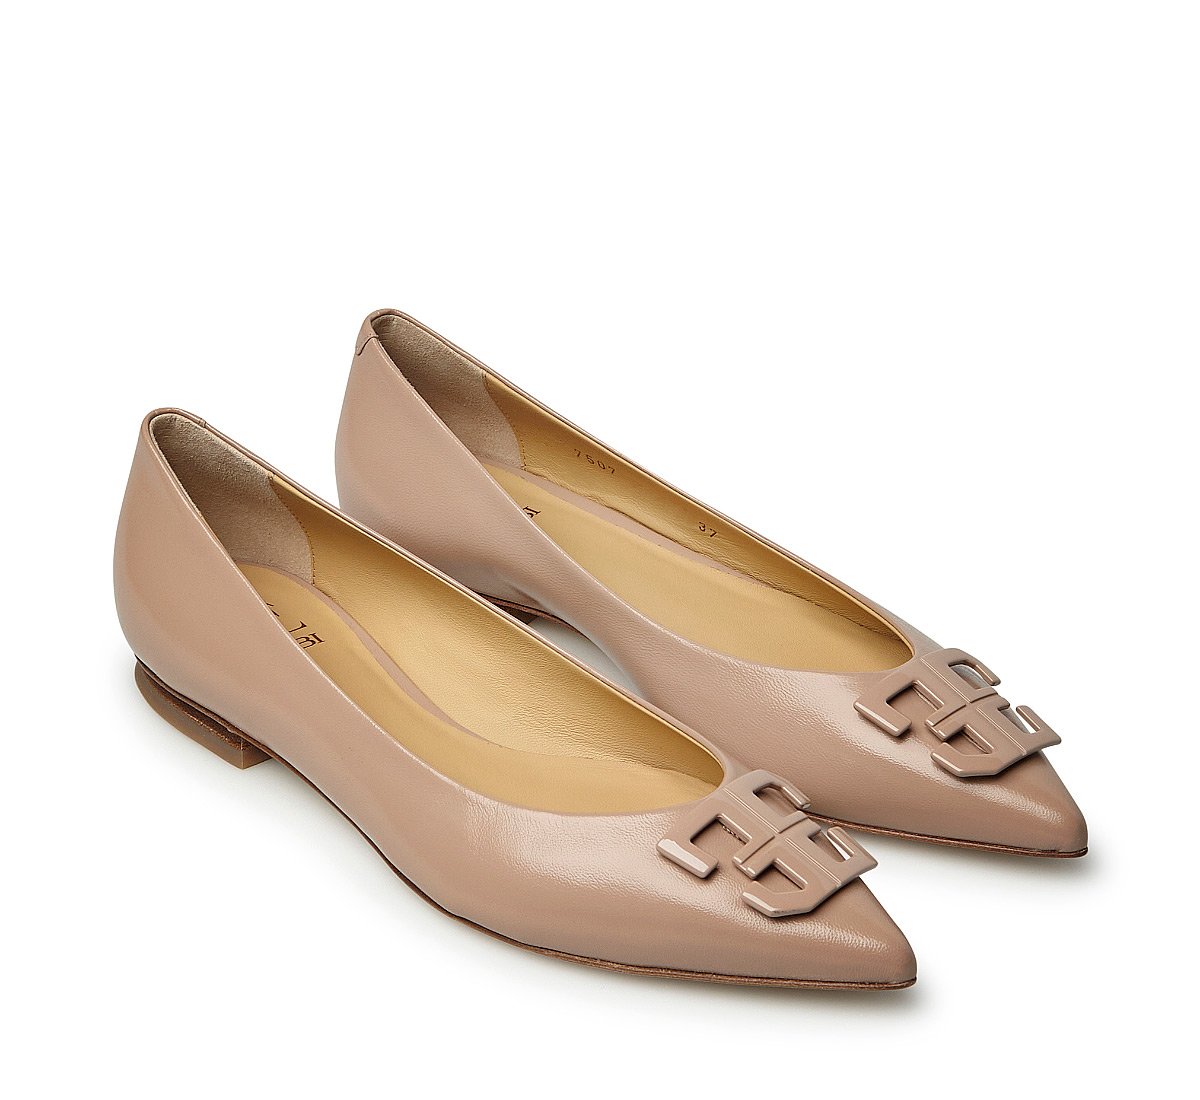 Iconic ballet flats in soft nappa leather